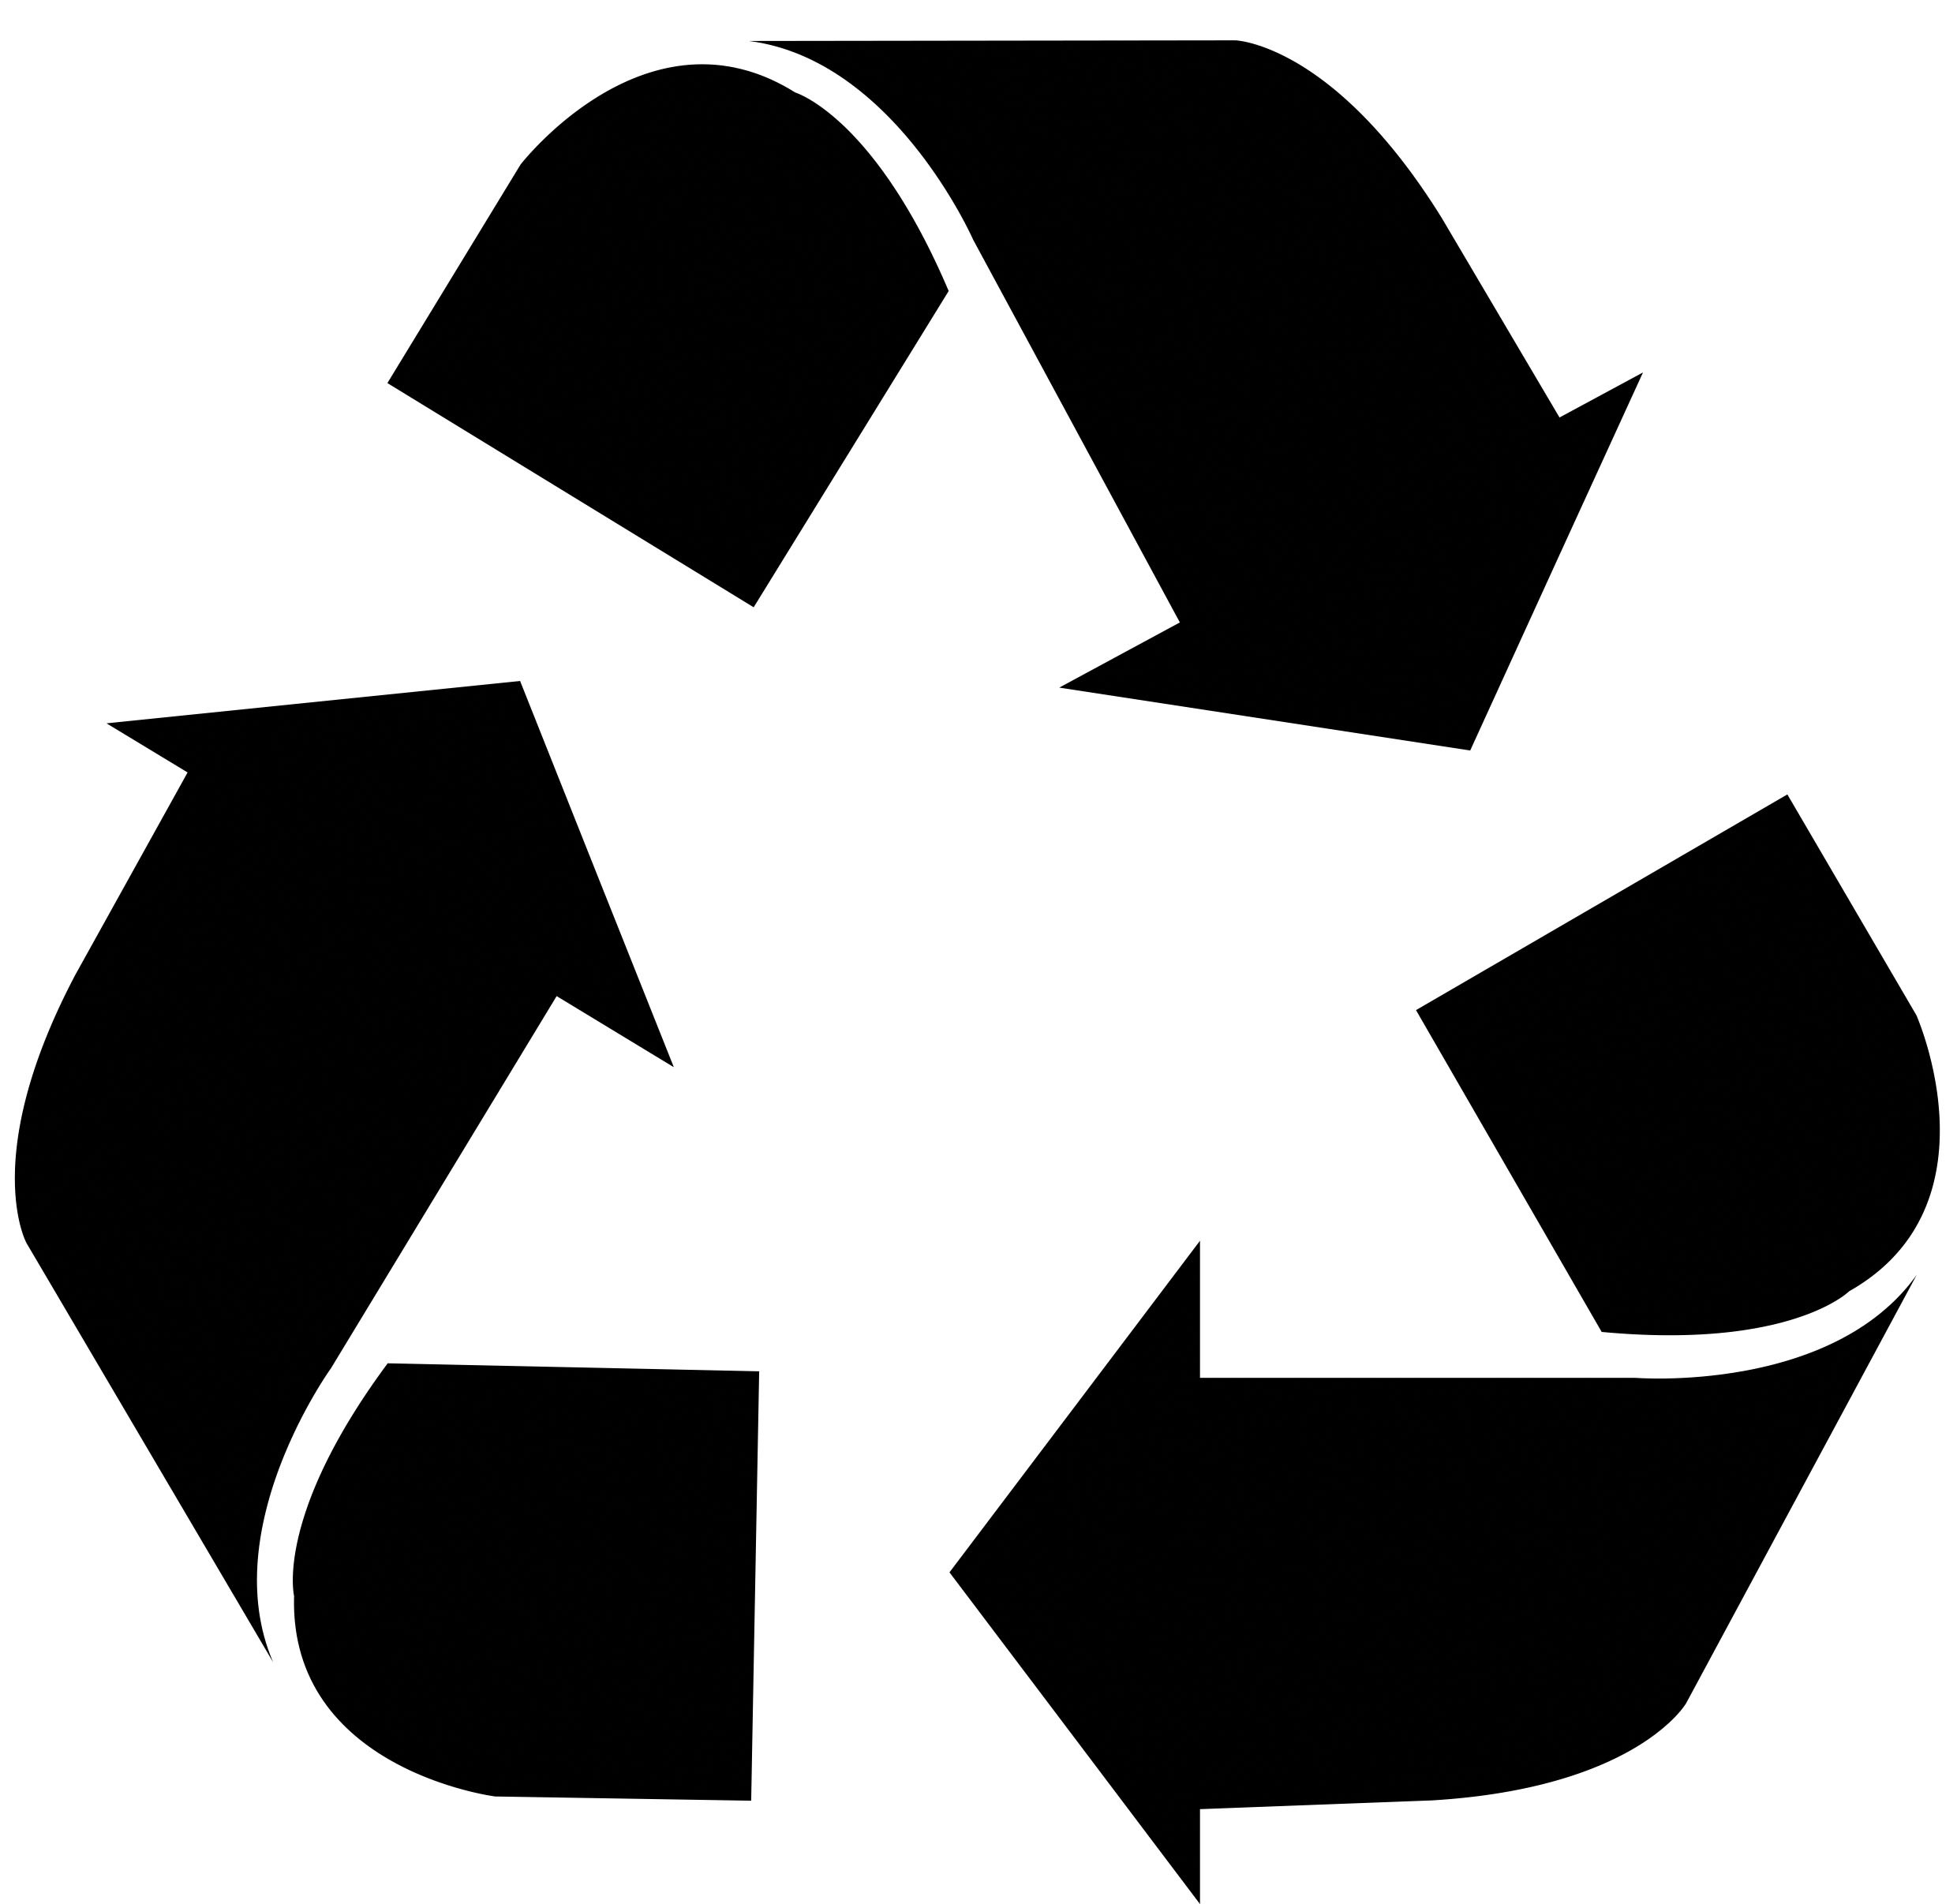 Recycling Symbol Black - ClipArt Best